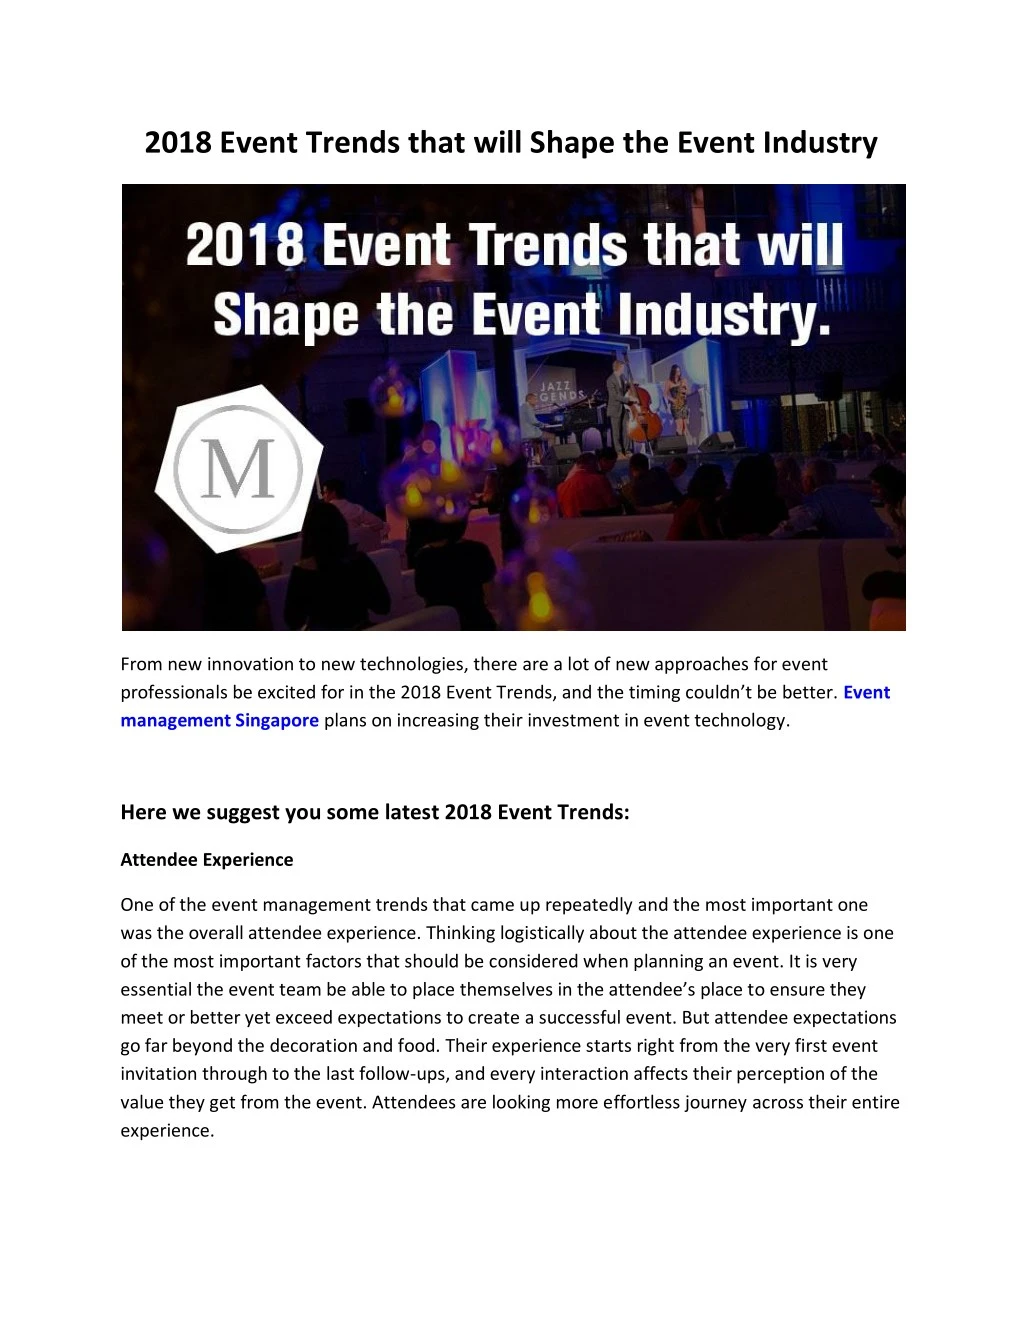 2018 event trends that will shape the event